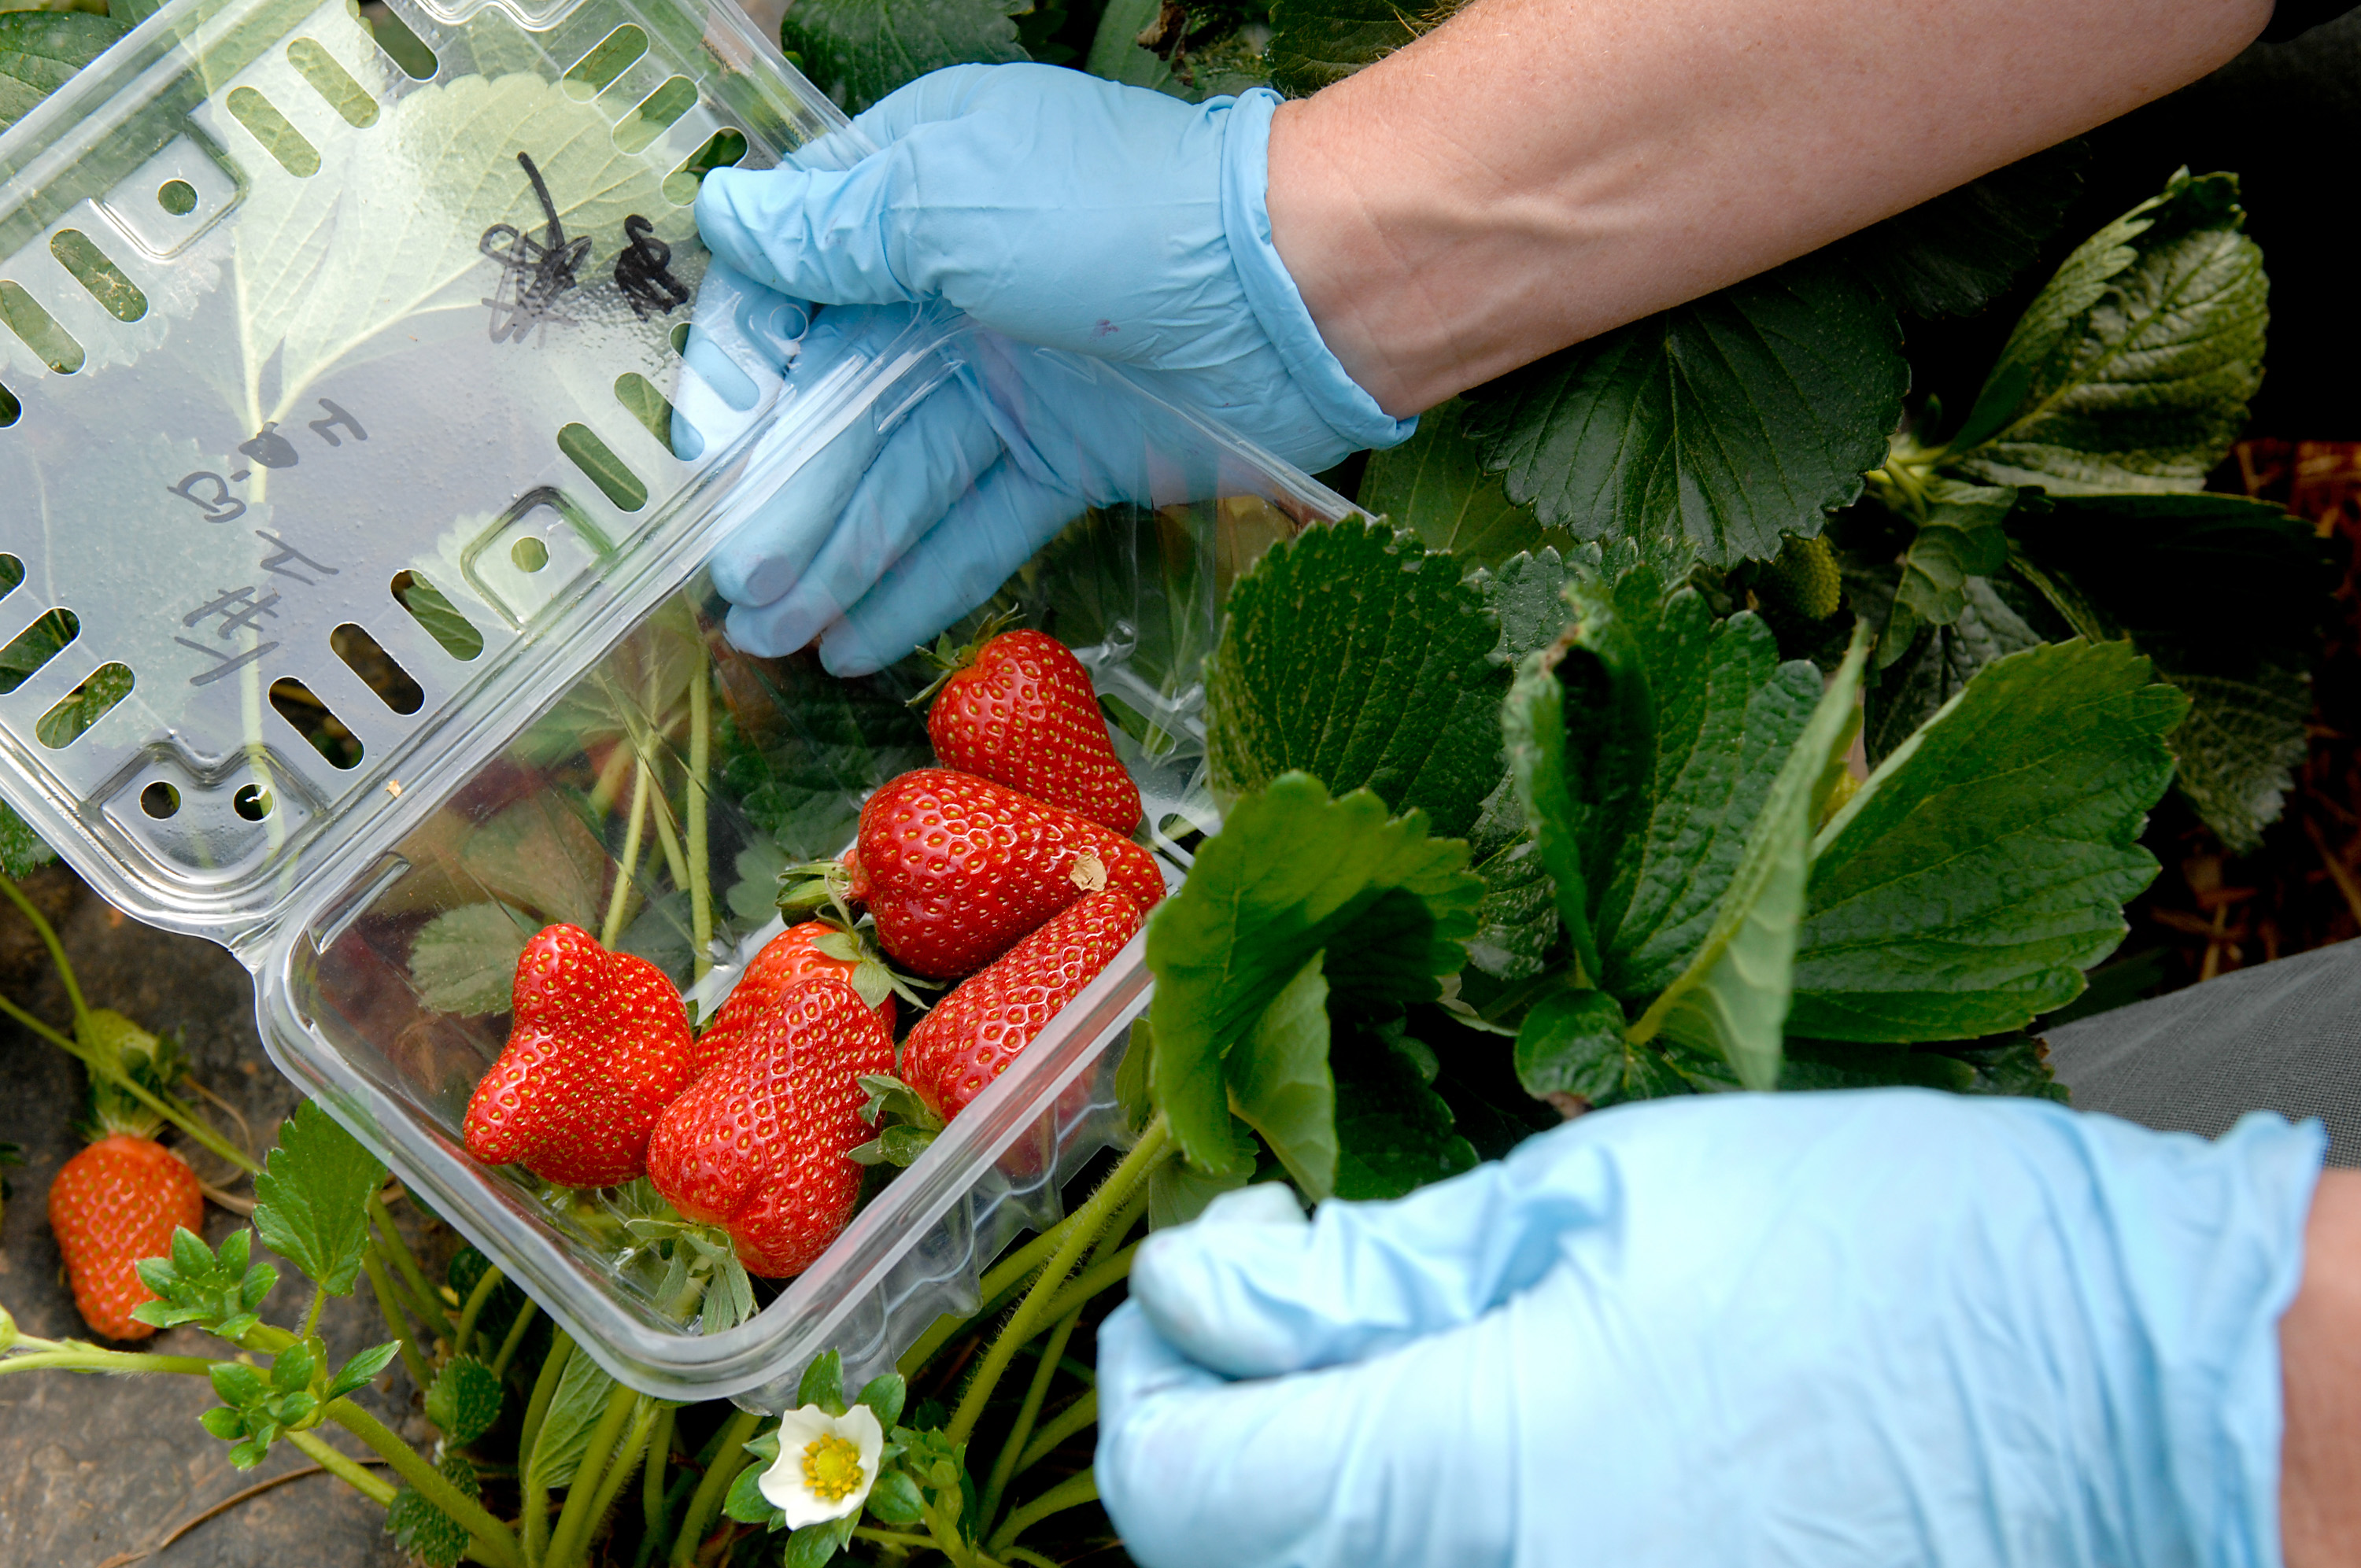 Strawberries are picked and then placed in a clamshell for distribution and market...Photo by Becky Kirkland